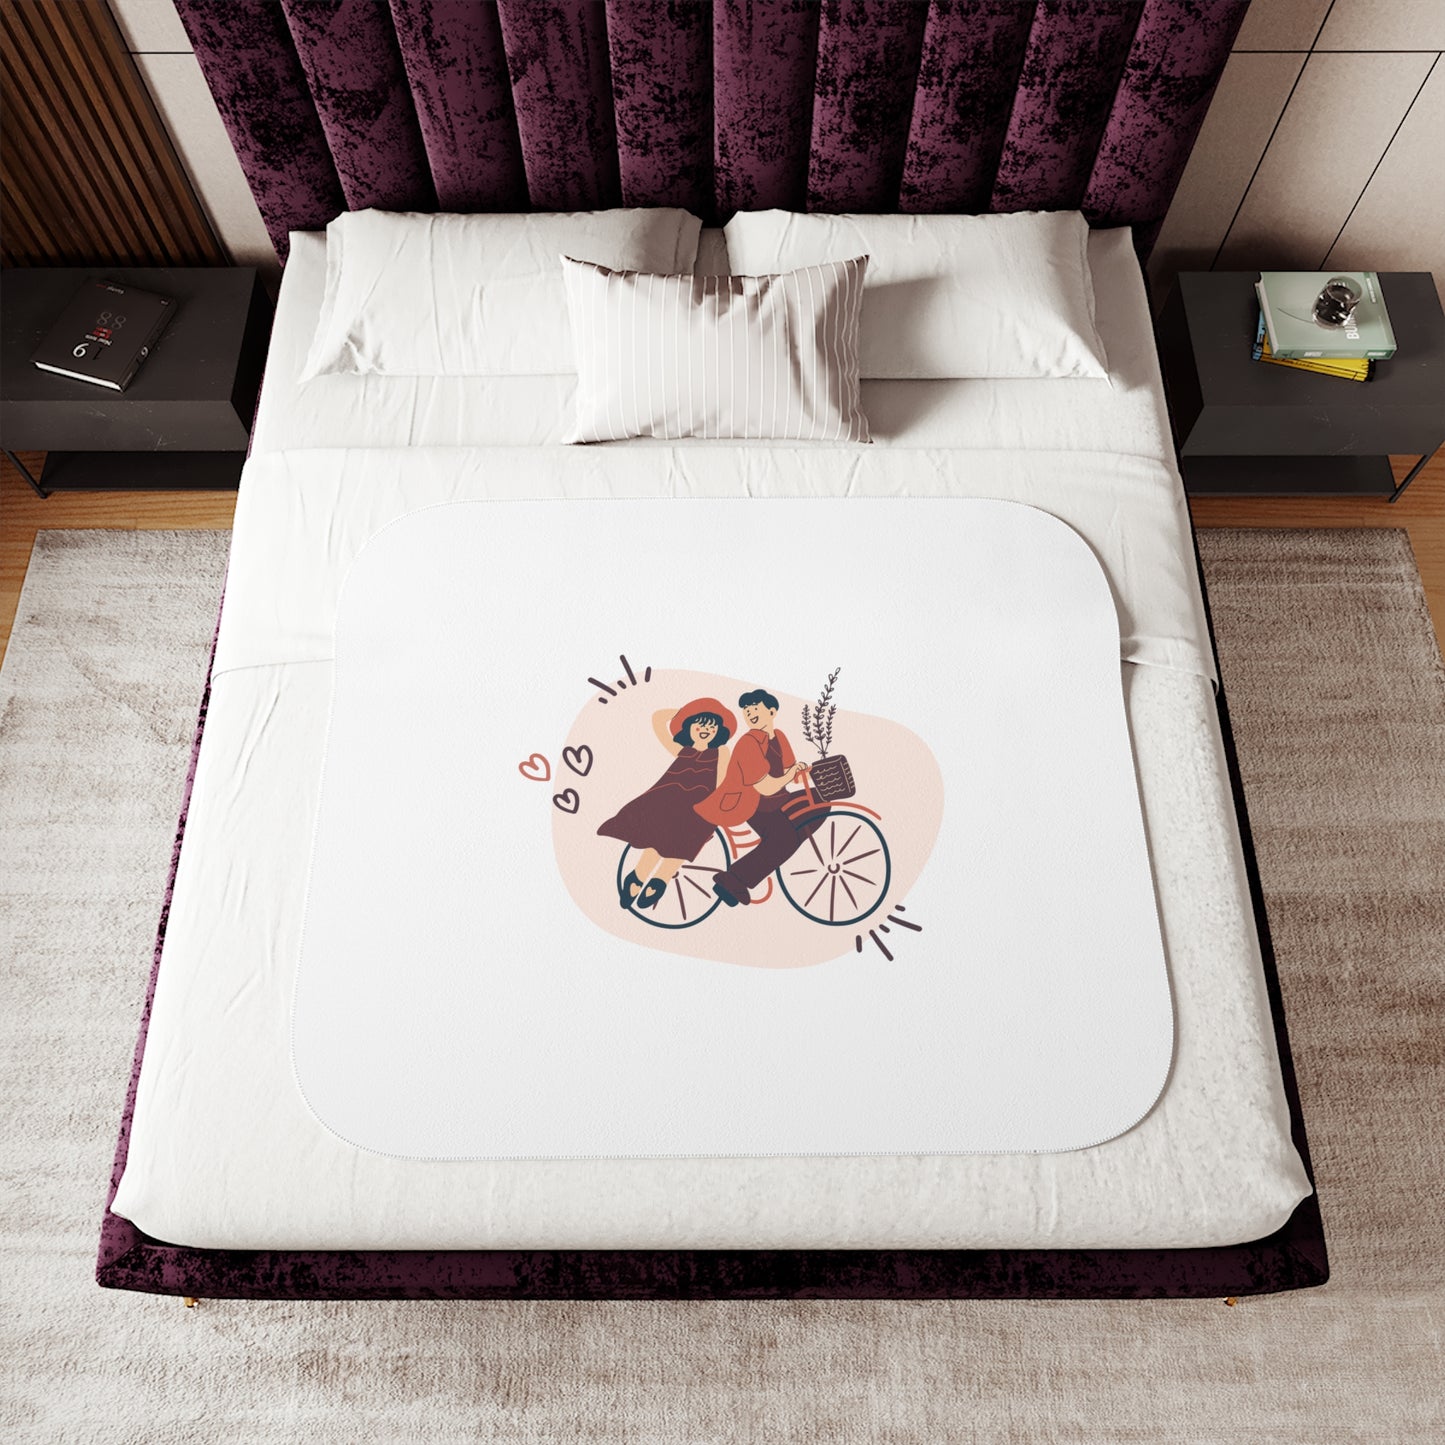 Couple on Cycle Printed Sherpa Blenket for Valentine Day